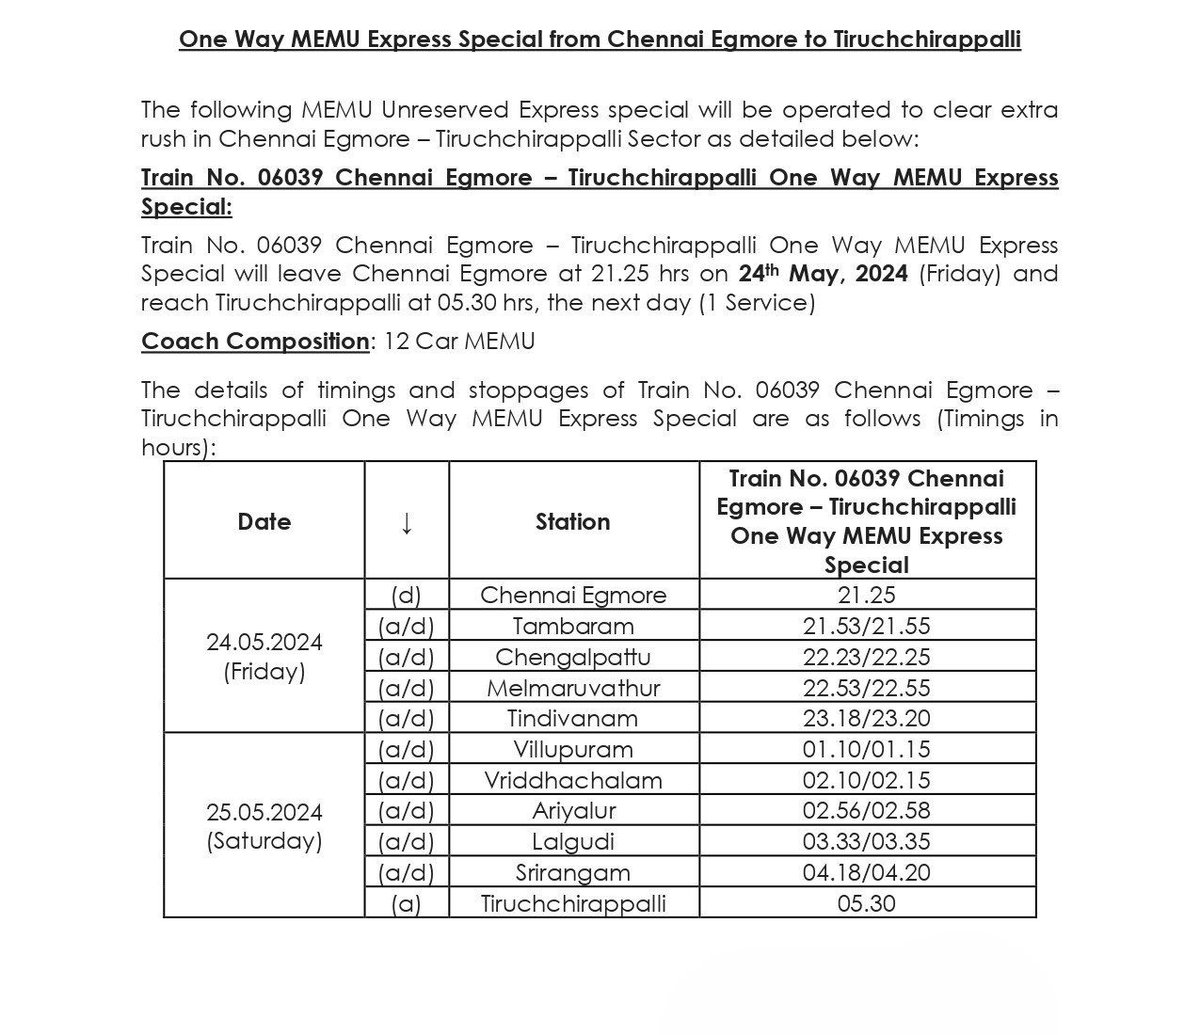 #SpecialTrain Alert:

Train No. 06039 Chennai Egmore–Tiruchchirappalli One Way MEMU Express Special will be operated to clear extra rush in the #ChennaiEgmore – #Tiruchchirappalli Sector, you can board the train from Tambaram too at 21:53 hrs.

#SouthernRailway #RailwayAlert